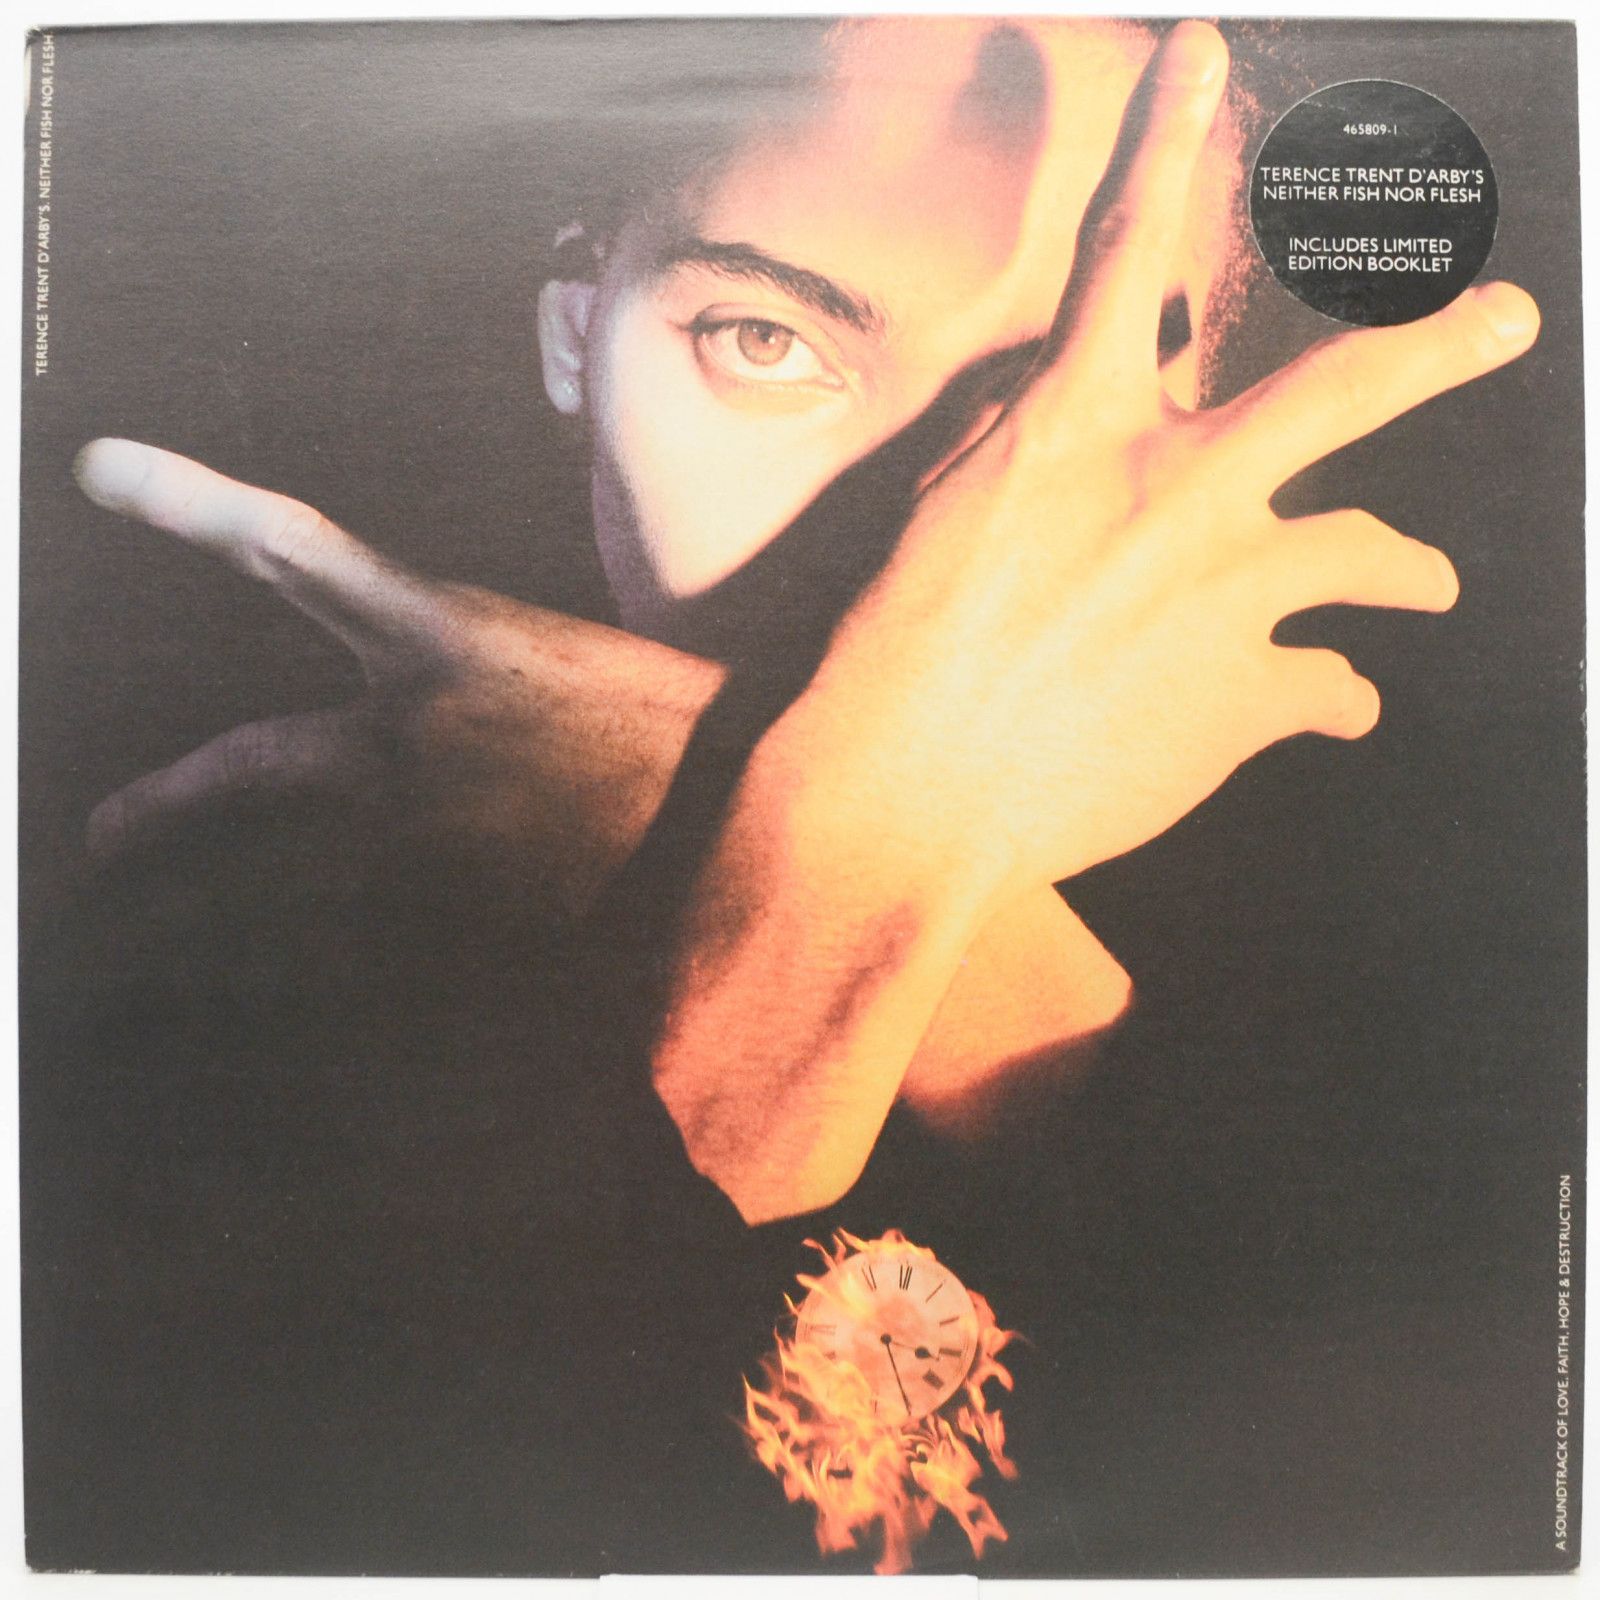 Terence Trent D'Arby — Terence Trent D'Arby's Neither Fish Nor Flesh: A Soundtrack Of Love, Faith, Hope And Destruction (UK, booklet), 1989